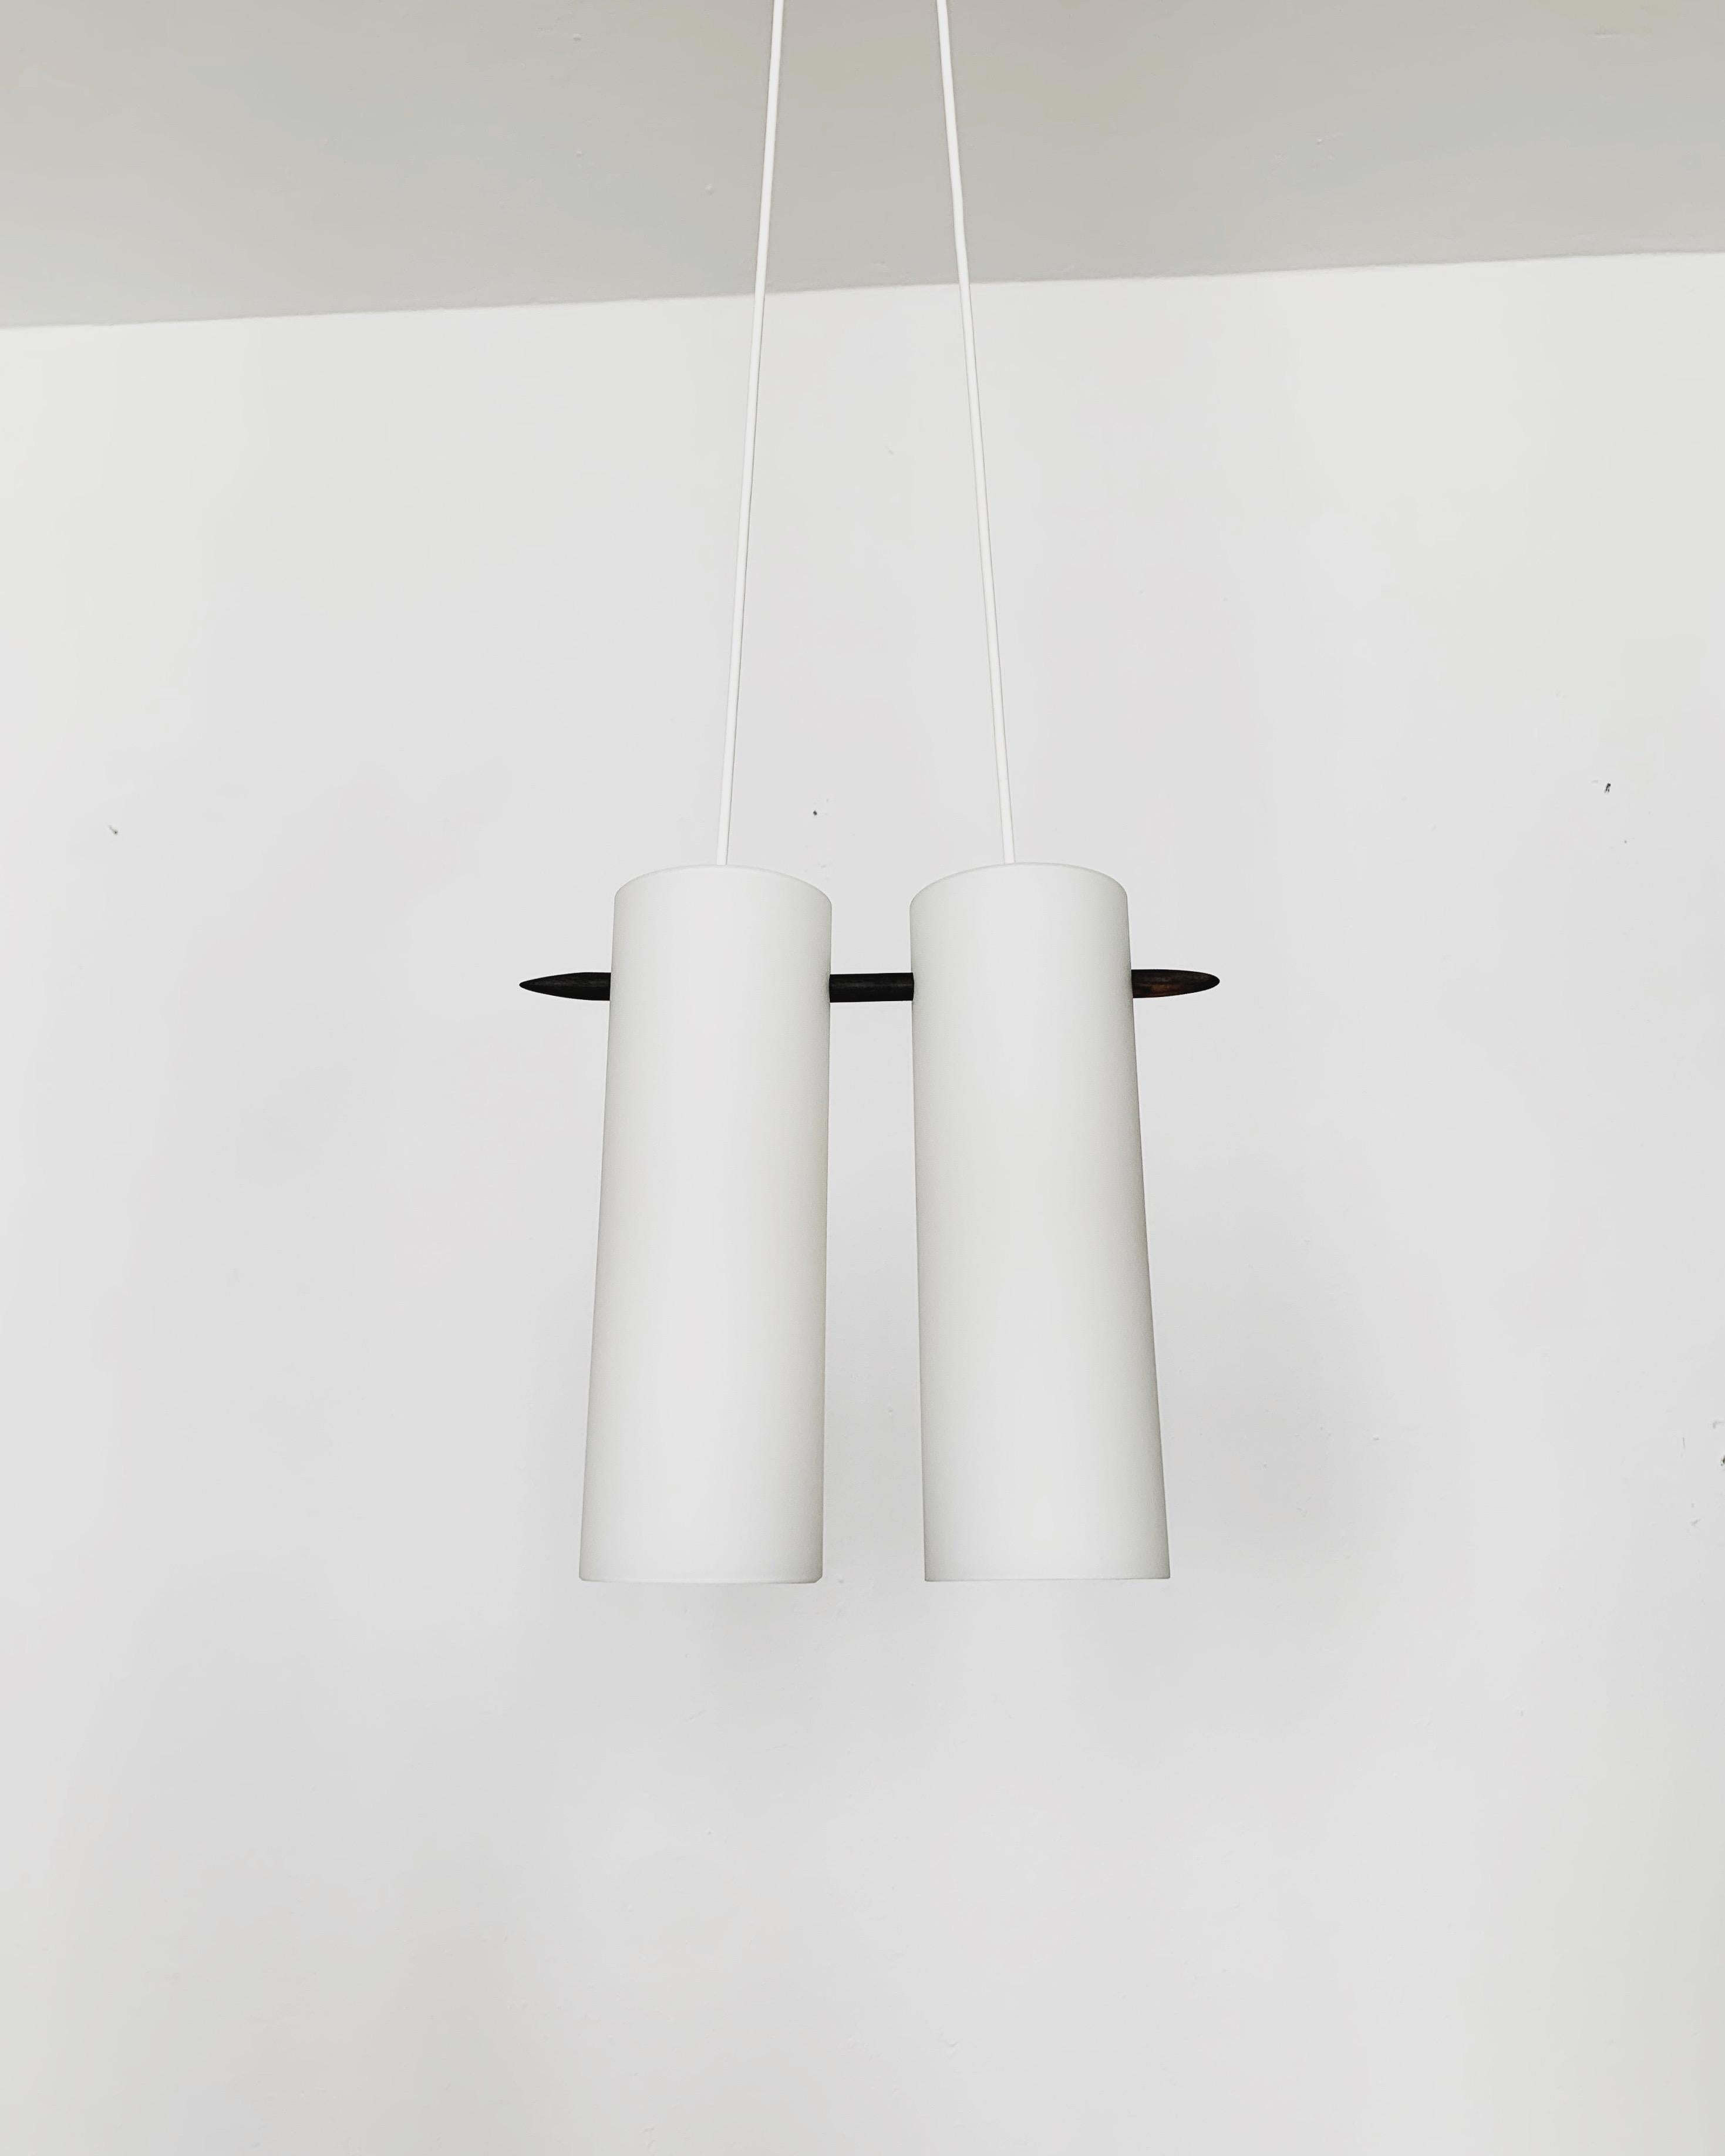 Wonderful Swedish opal glass pendant lamp from the 1960s.
Great and exceptionally minimalistic design with a fantastically elegant look.
Very nice details like the ebonized stick.

Manufacturer: Luxus
Design: Uno and Östen